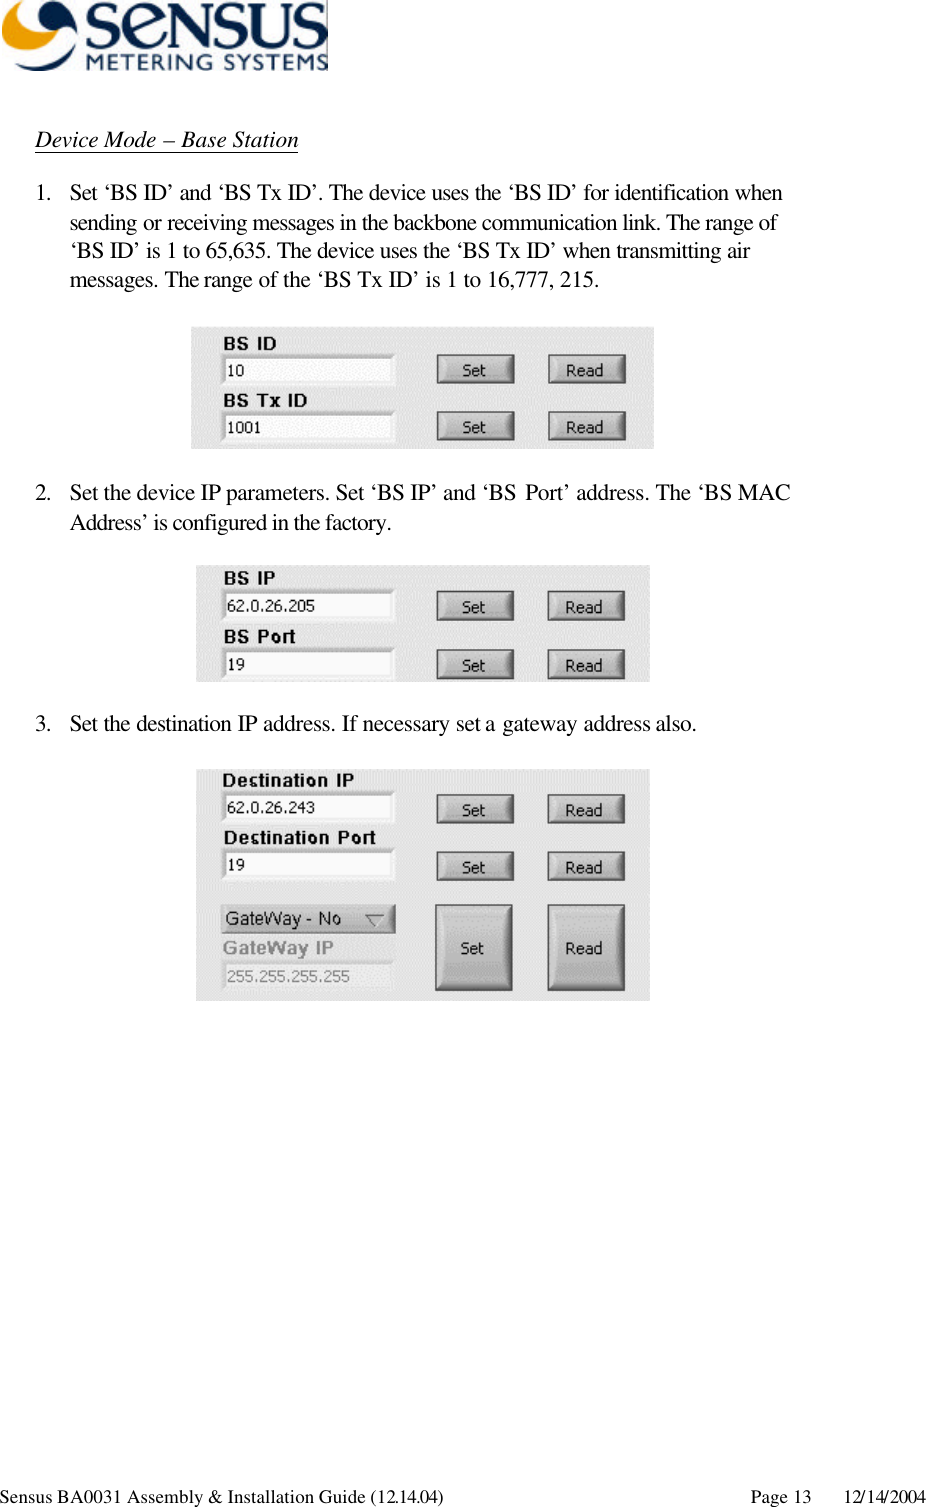      Sensus BA0031 Assembly &amp; Installation Guide (12.14.04) Page 13 12/14/2004 Device Mode – Base Station 1. Set ‘BS ID’ and ‘BS Tx ID’. The device uses the ‘BS ID’ for identification when sending or receiving messages in the backbone communication link. The range of ‘BS ID’ is 1 to 65,635. The device uses the ‘BS Tx ID’ when transmitting air messages. The range of the ‘BS Tx ID’ is 1 to 16,777, 215.    2. Set the device IP parameters. Set ‘BS IP’ and ‘BS Port’ address. The ‘BS MAC Address’ is configured in the factory.    3. Set the destination IP address. If necessary set a gateway address also.   